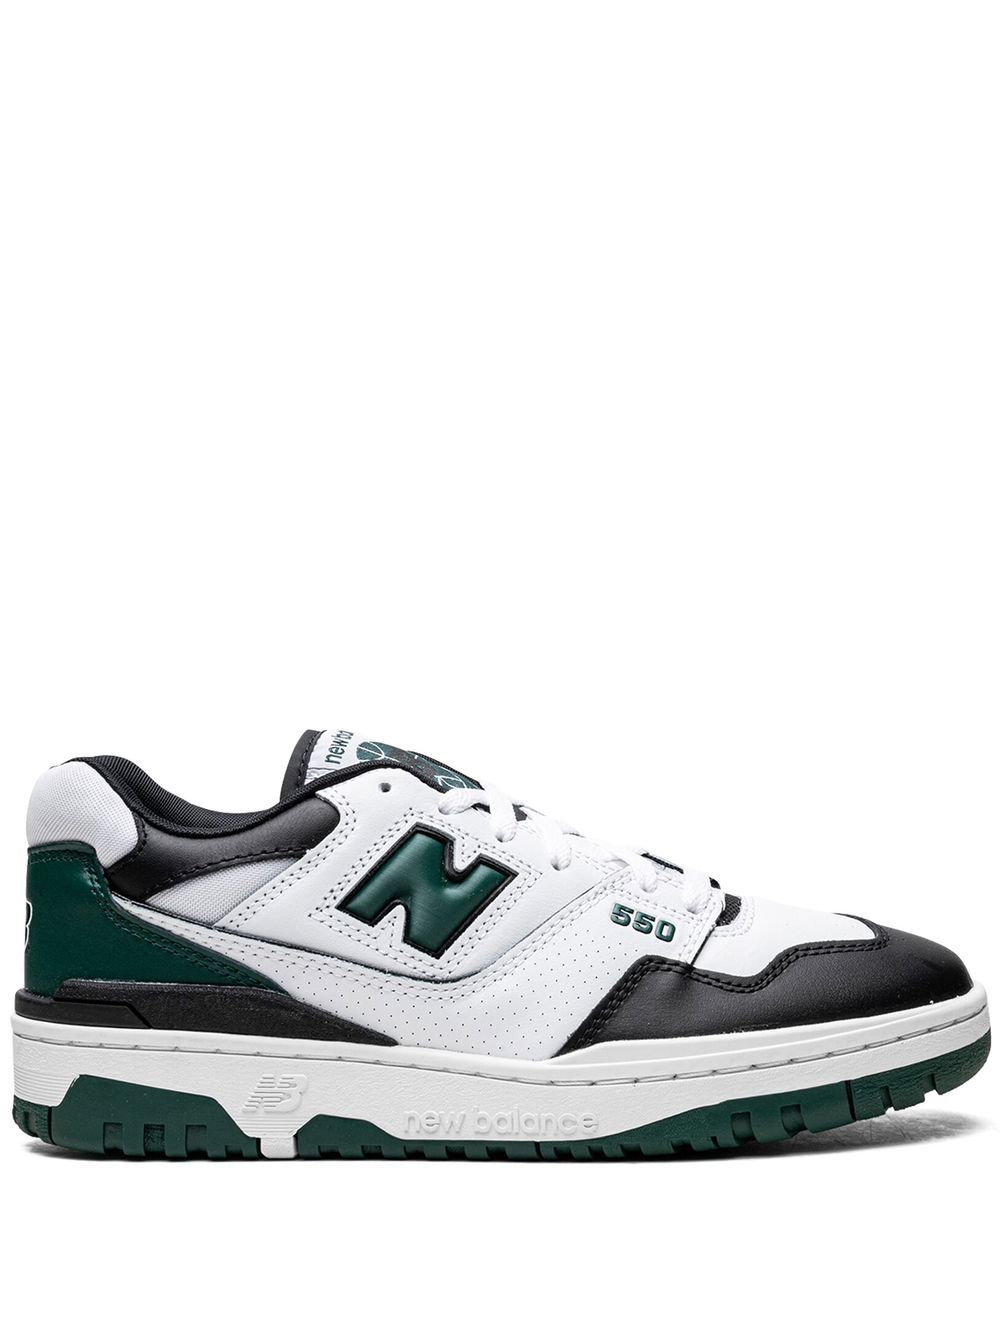 New Balance 550 "Black/White/Green" low-top sneakers